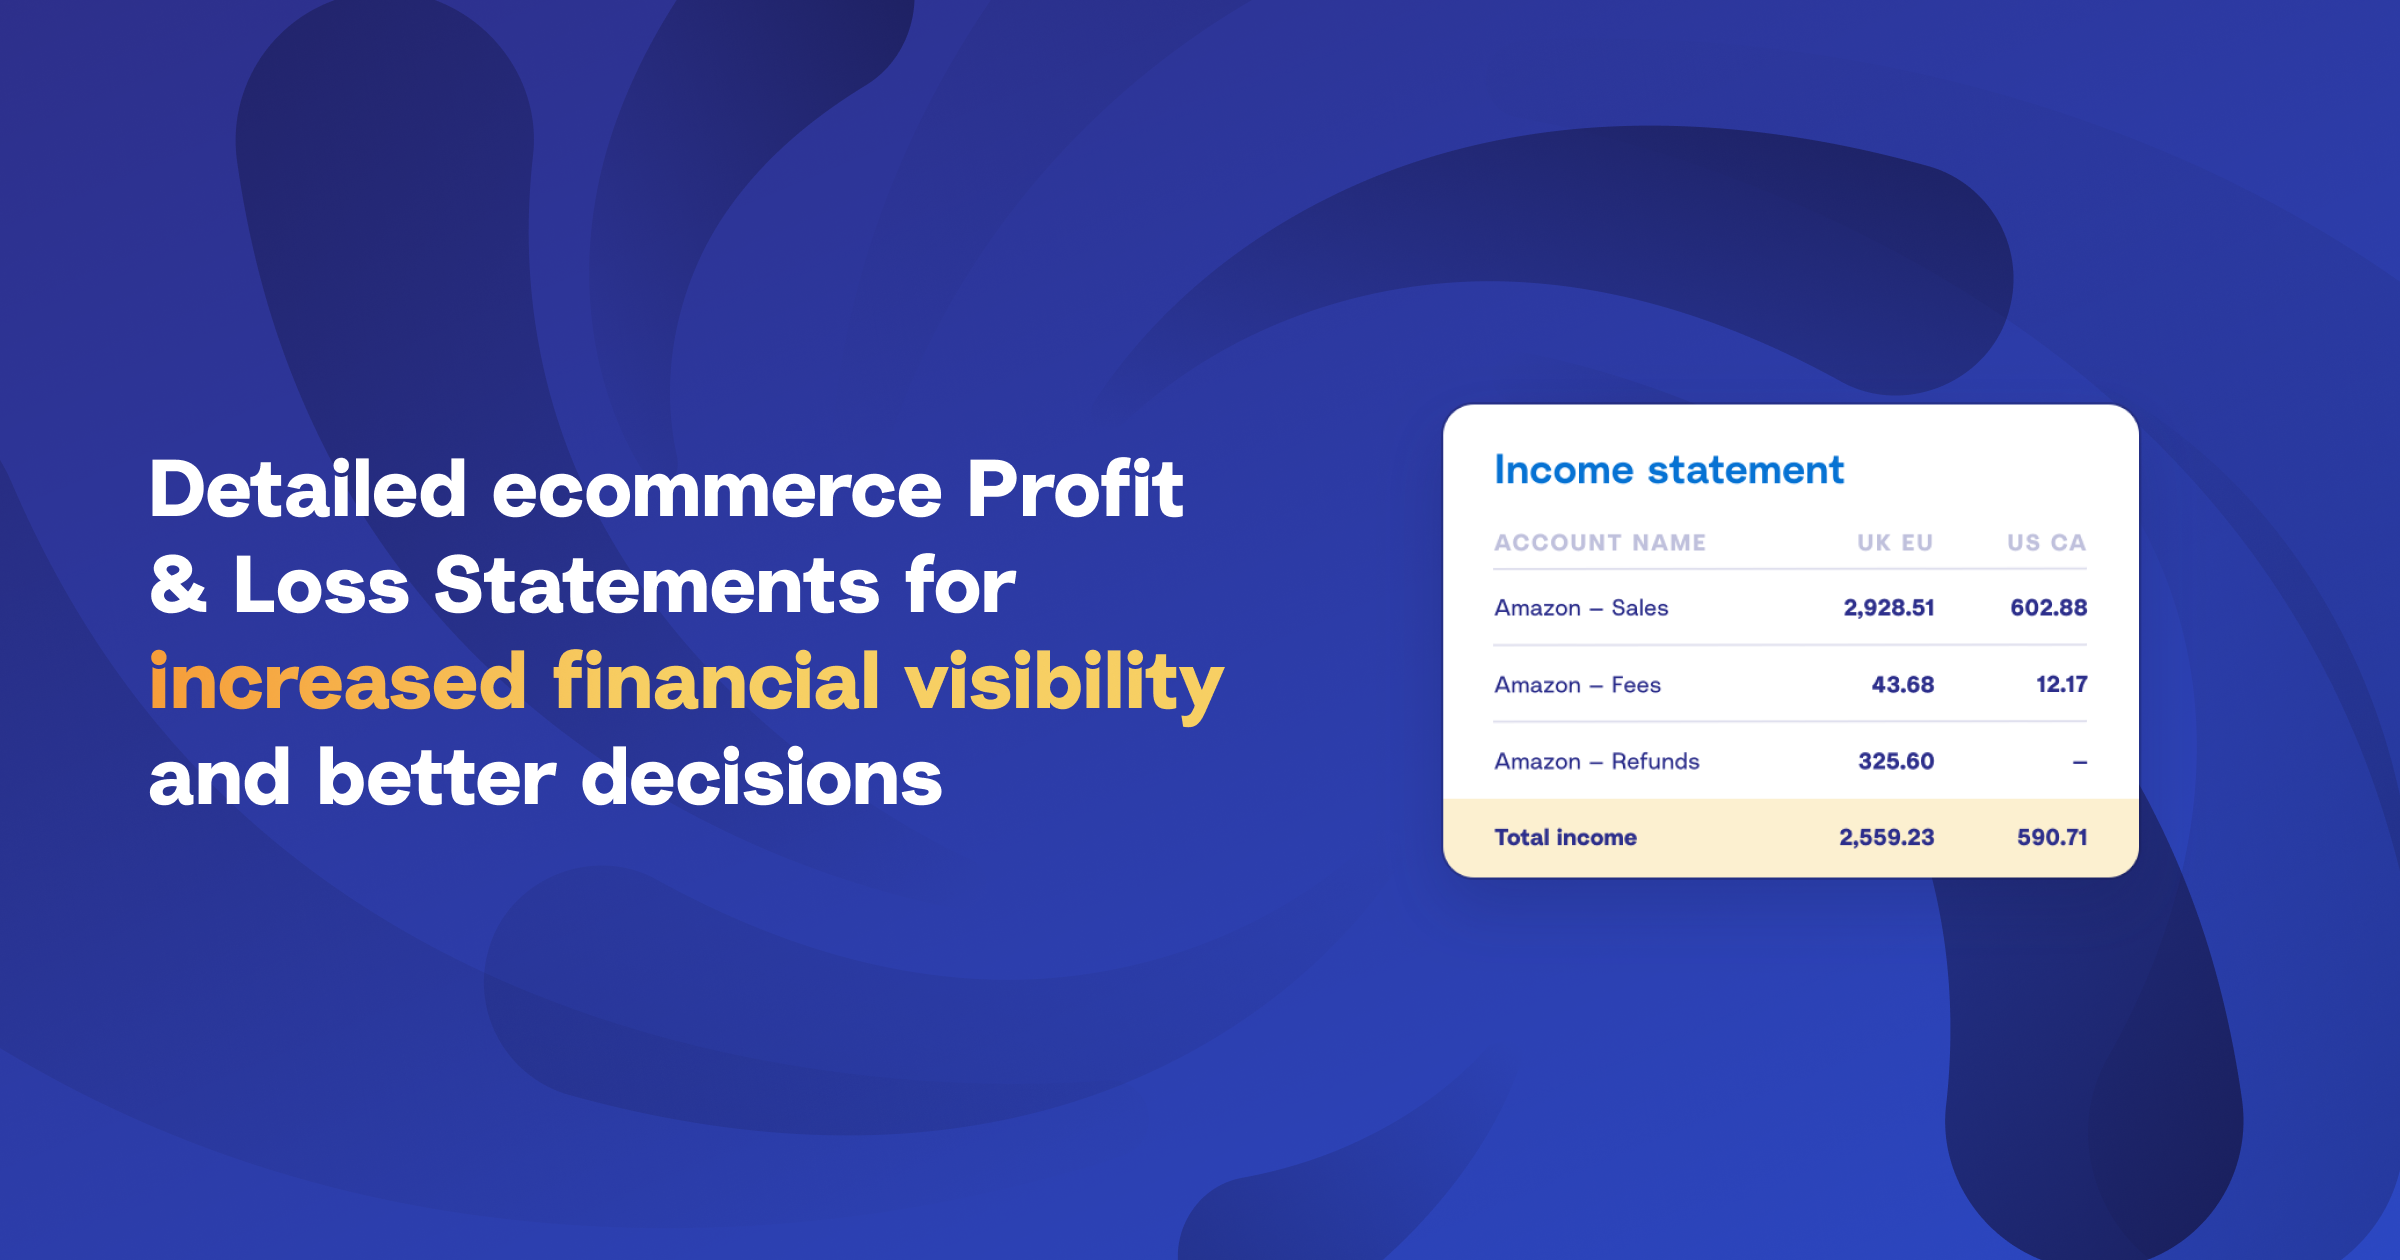 Detailed ecommerce financial reporting, less guesswork – keep track of your profit margins, COGS, channel performance, and more with accurate financial statements.